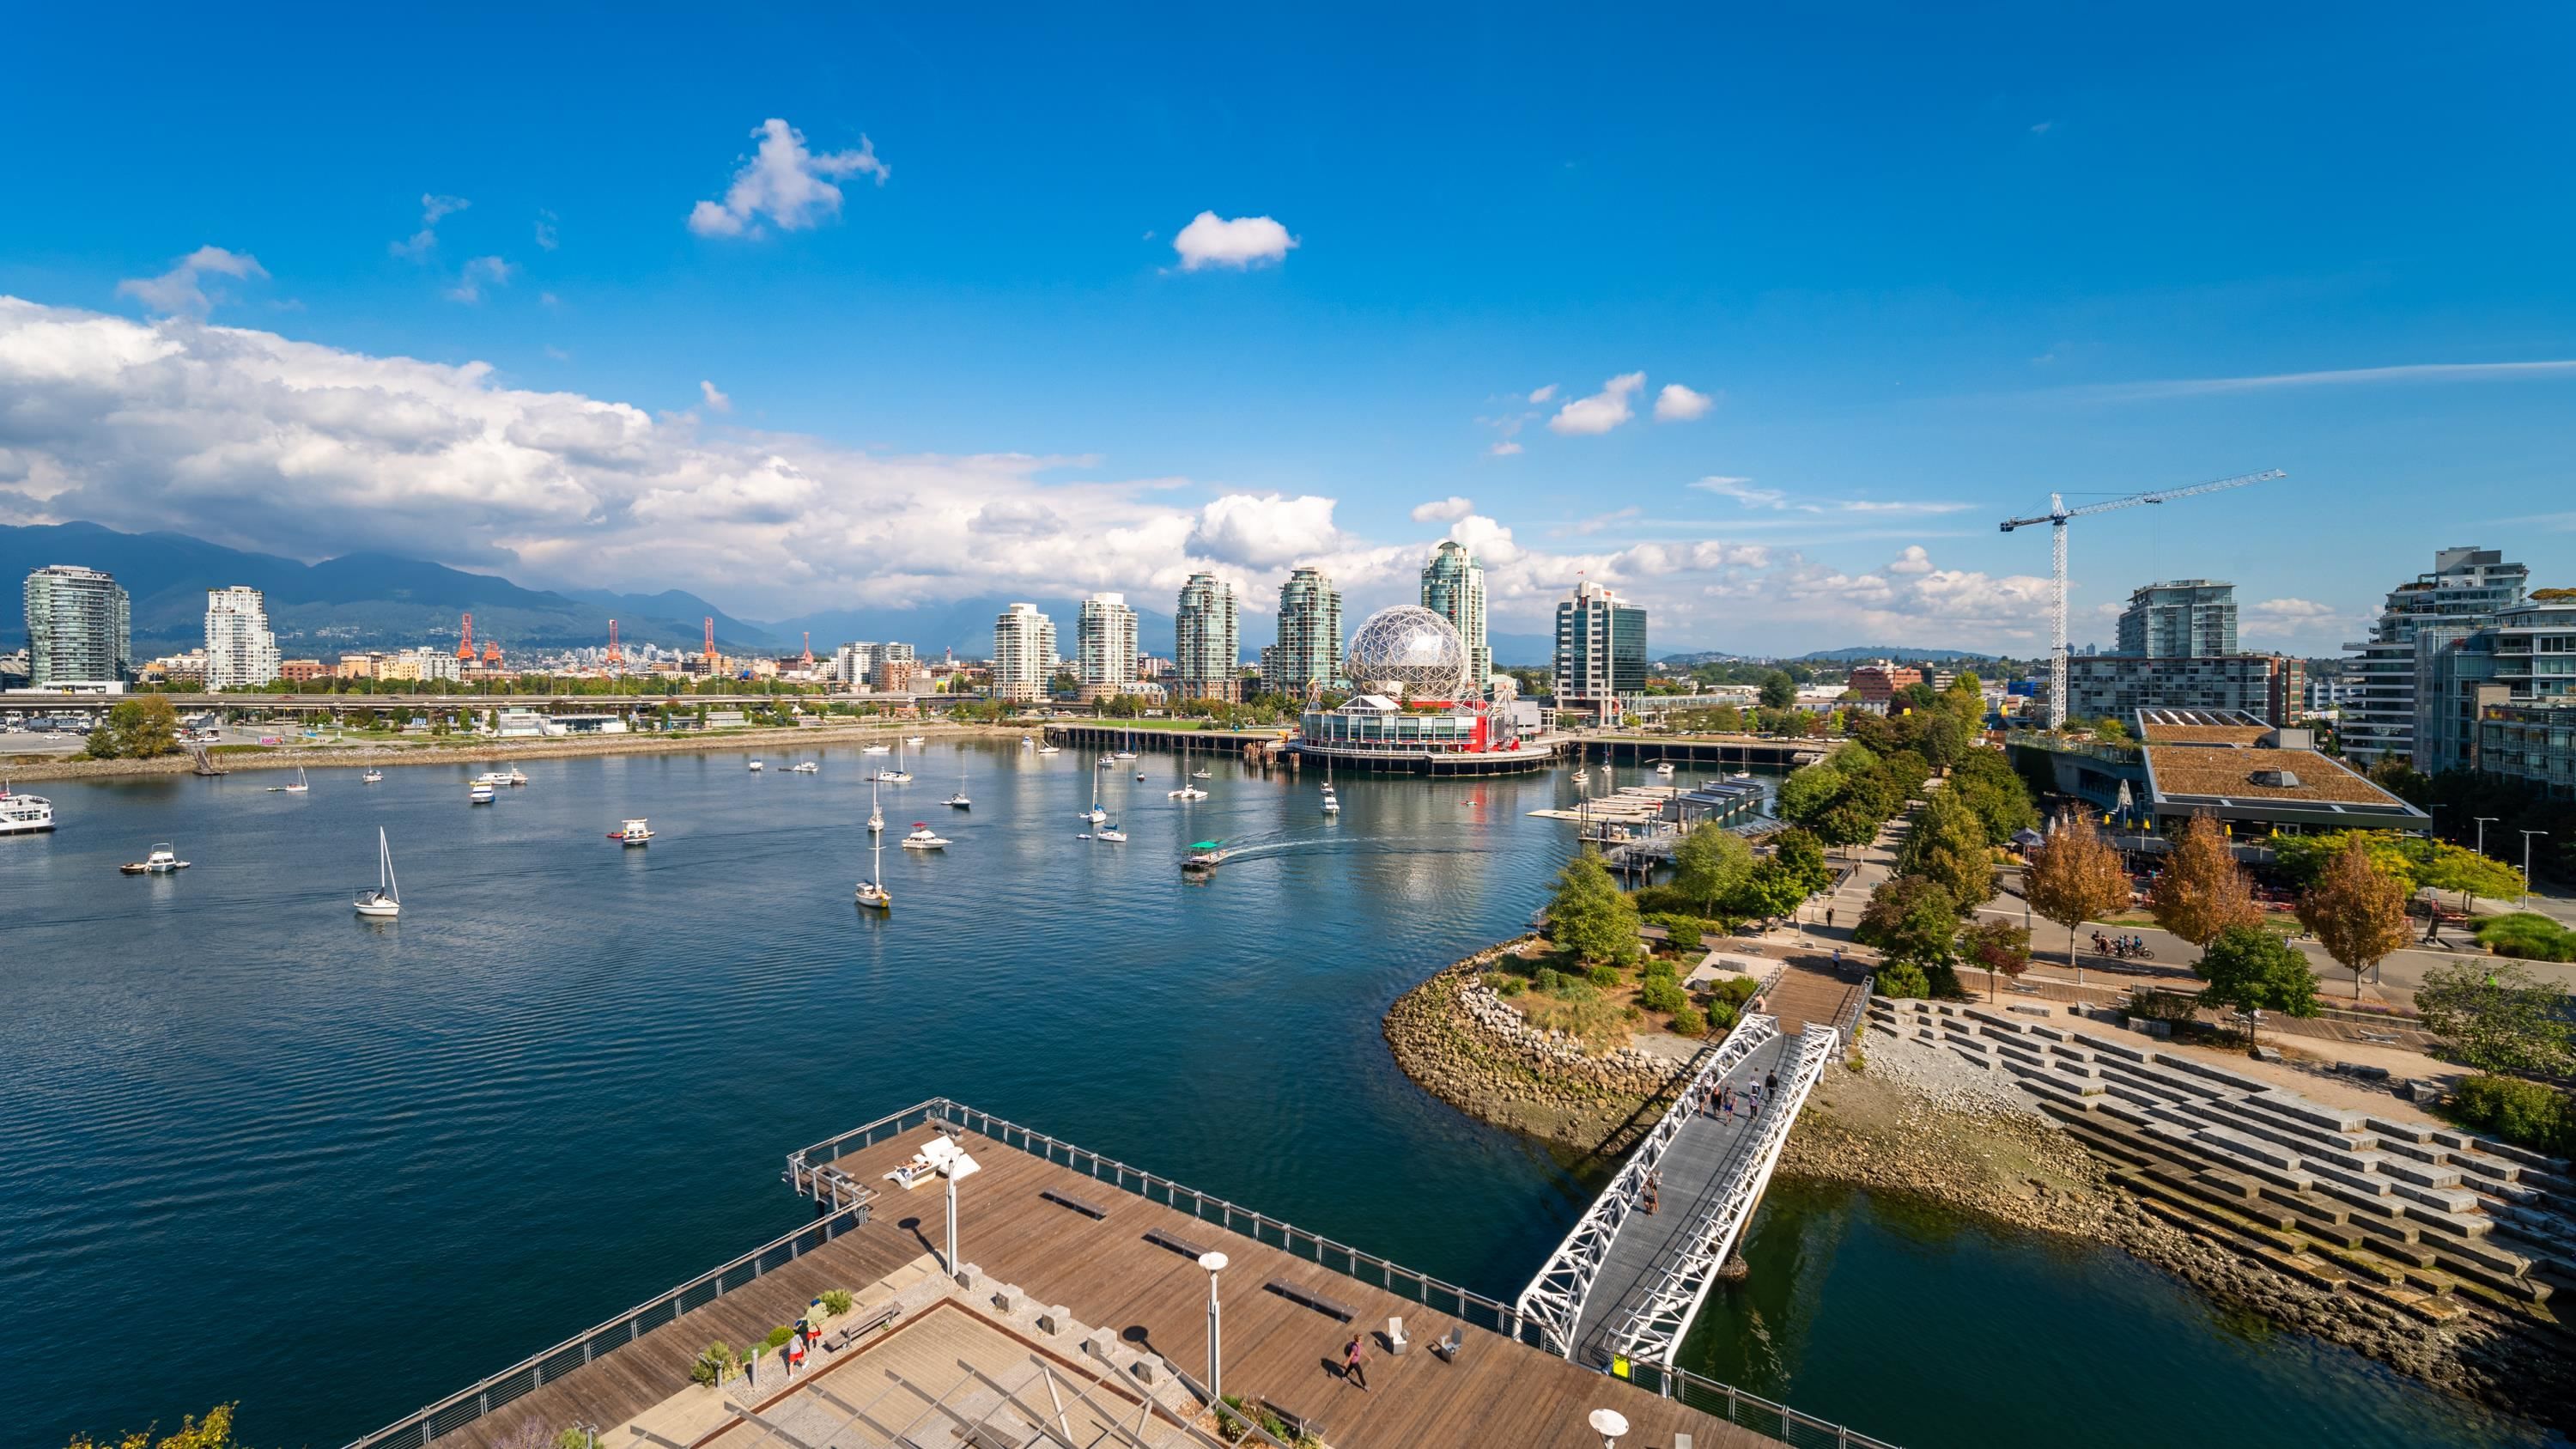 Main Photo: 701 151 ATHLETES WAY in Vancouver: False Creek Condo for sale (Vancouver West)  : MLS®# R2653667